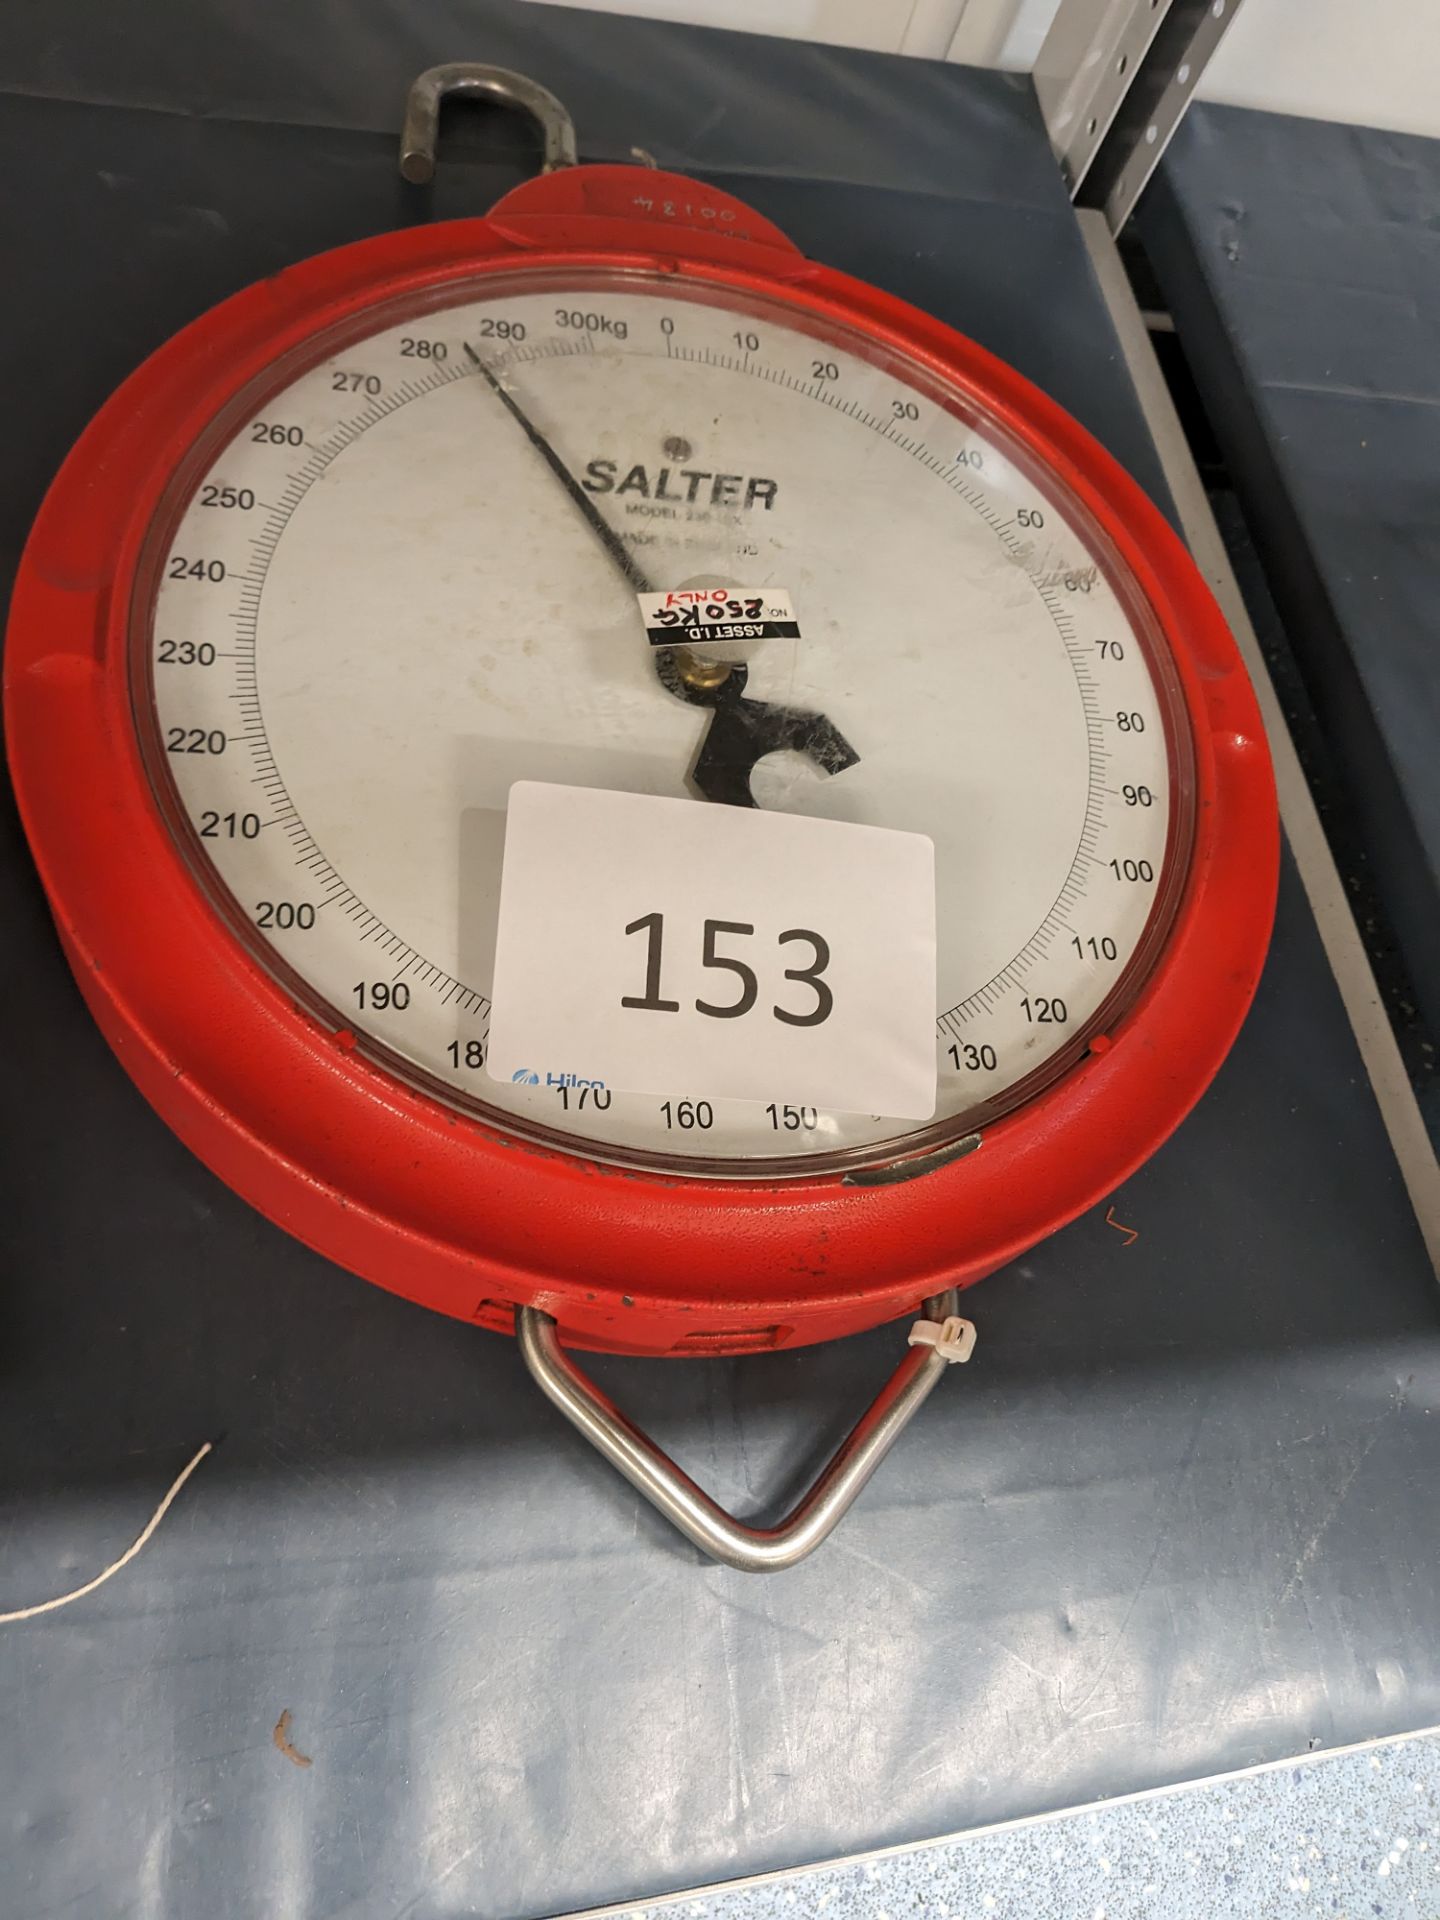 1: Salter Model 235 10x Weigh Scale. Serial number 97930